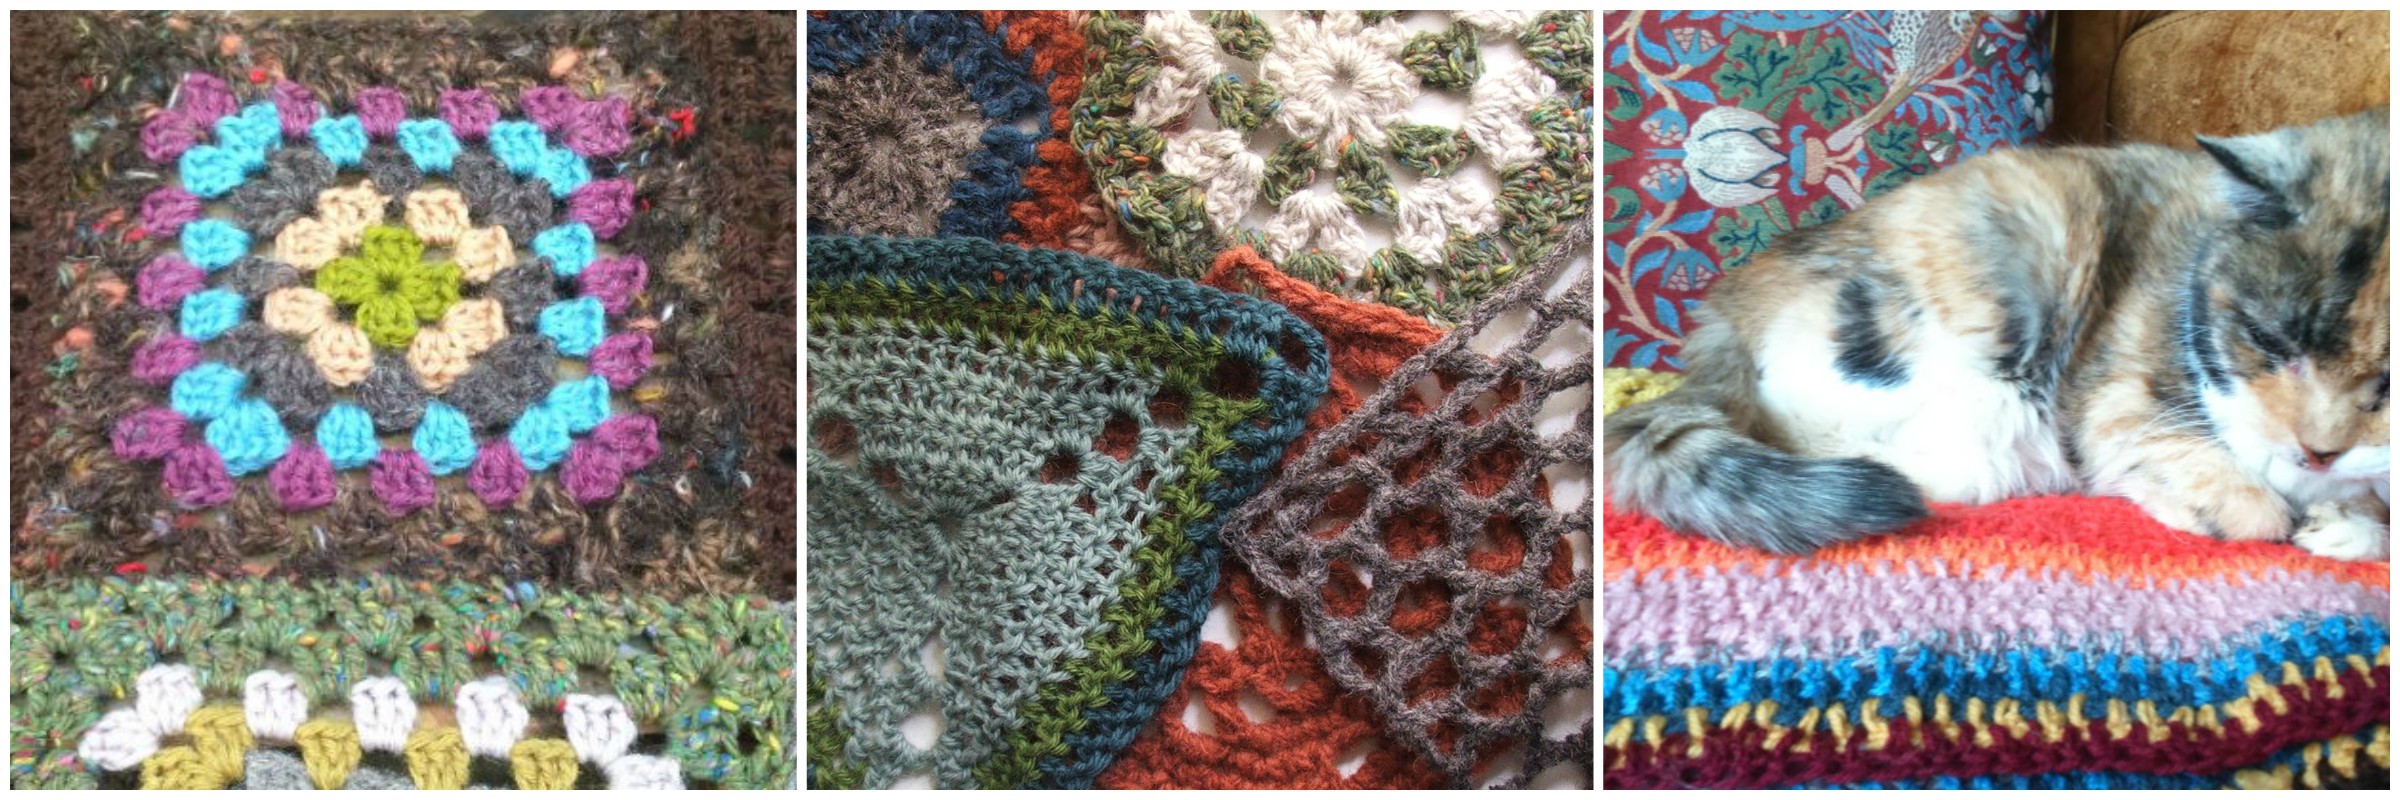 It’s Easy to Learn Crochet: More Than You Think